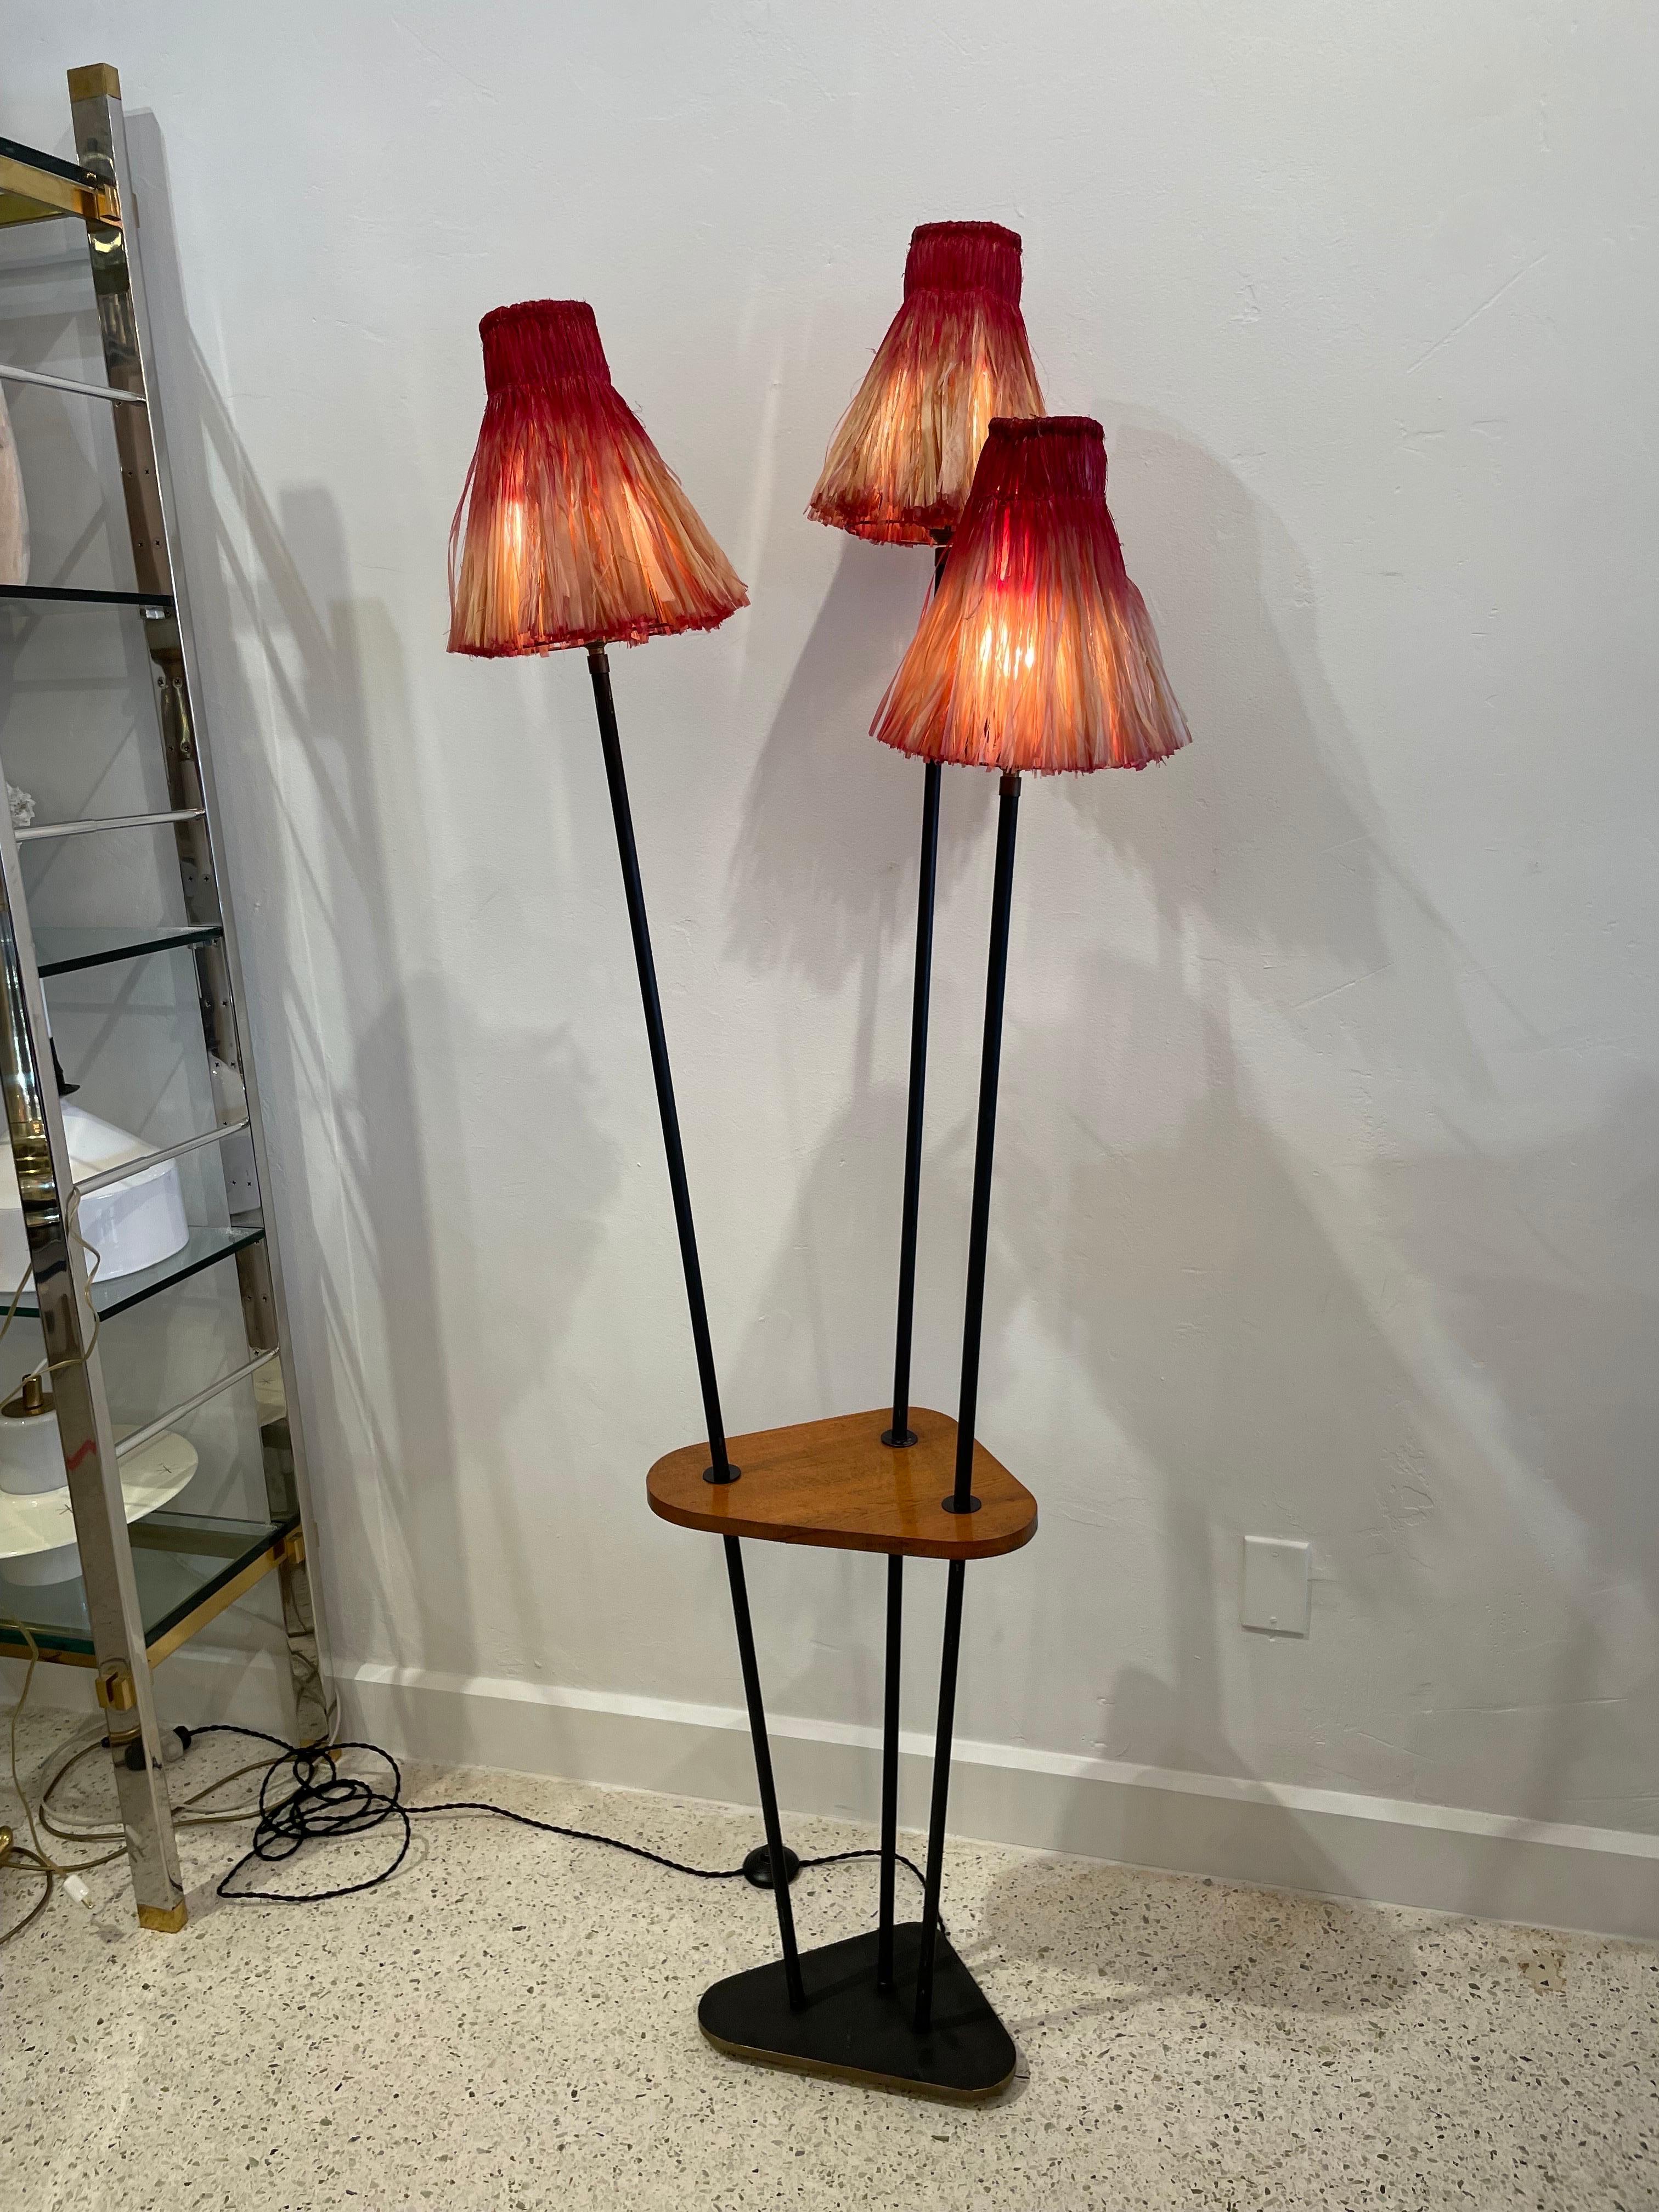 This French 1950's 3-arm floor lamp with floating wood drinks plateau is accented wonderfully by its natural raffia Tiki shades. This calls to the French Polynesian aesthetic, very mid-century and at the same time, modern and chic! This would fit in